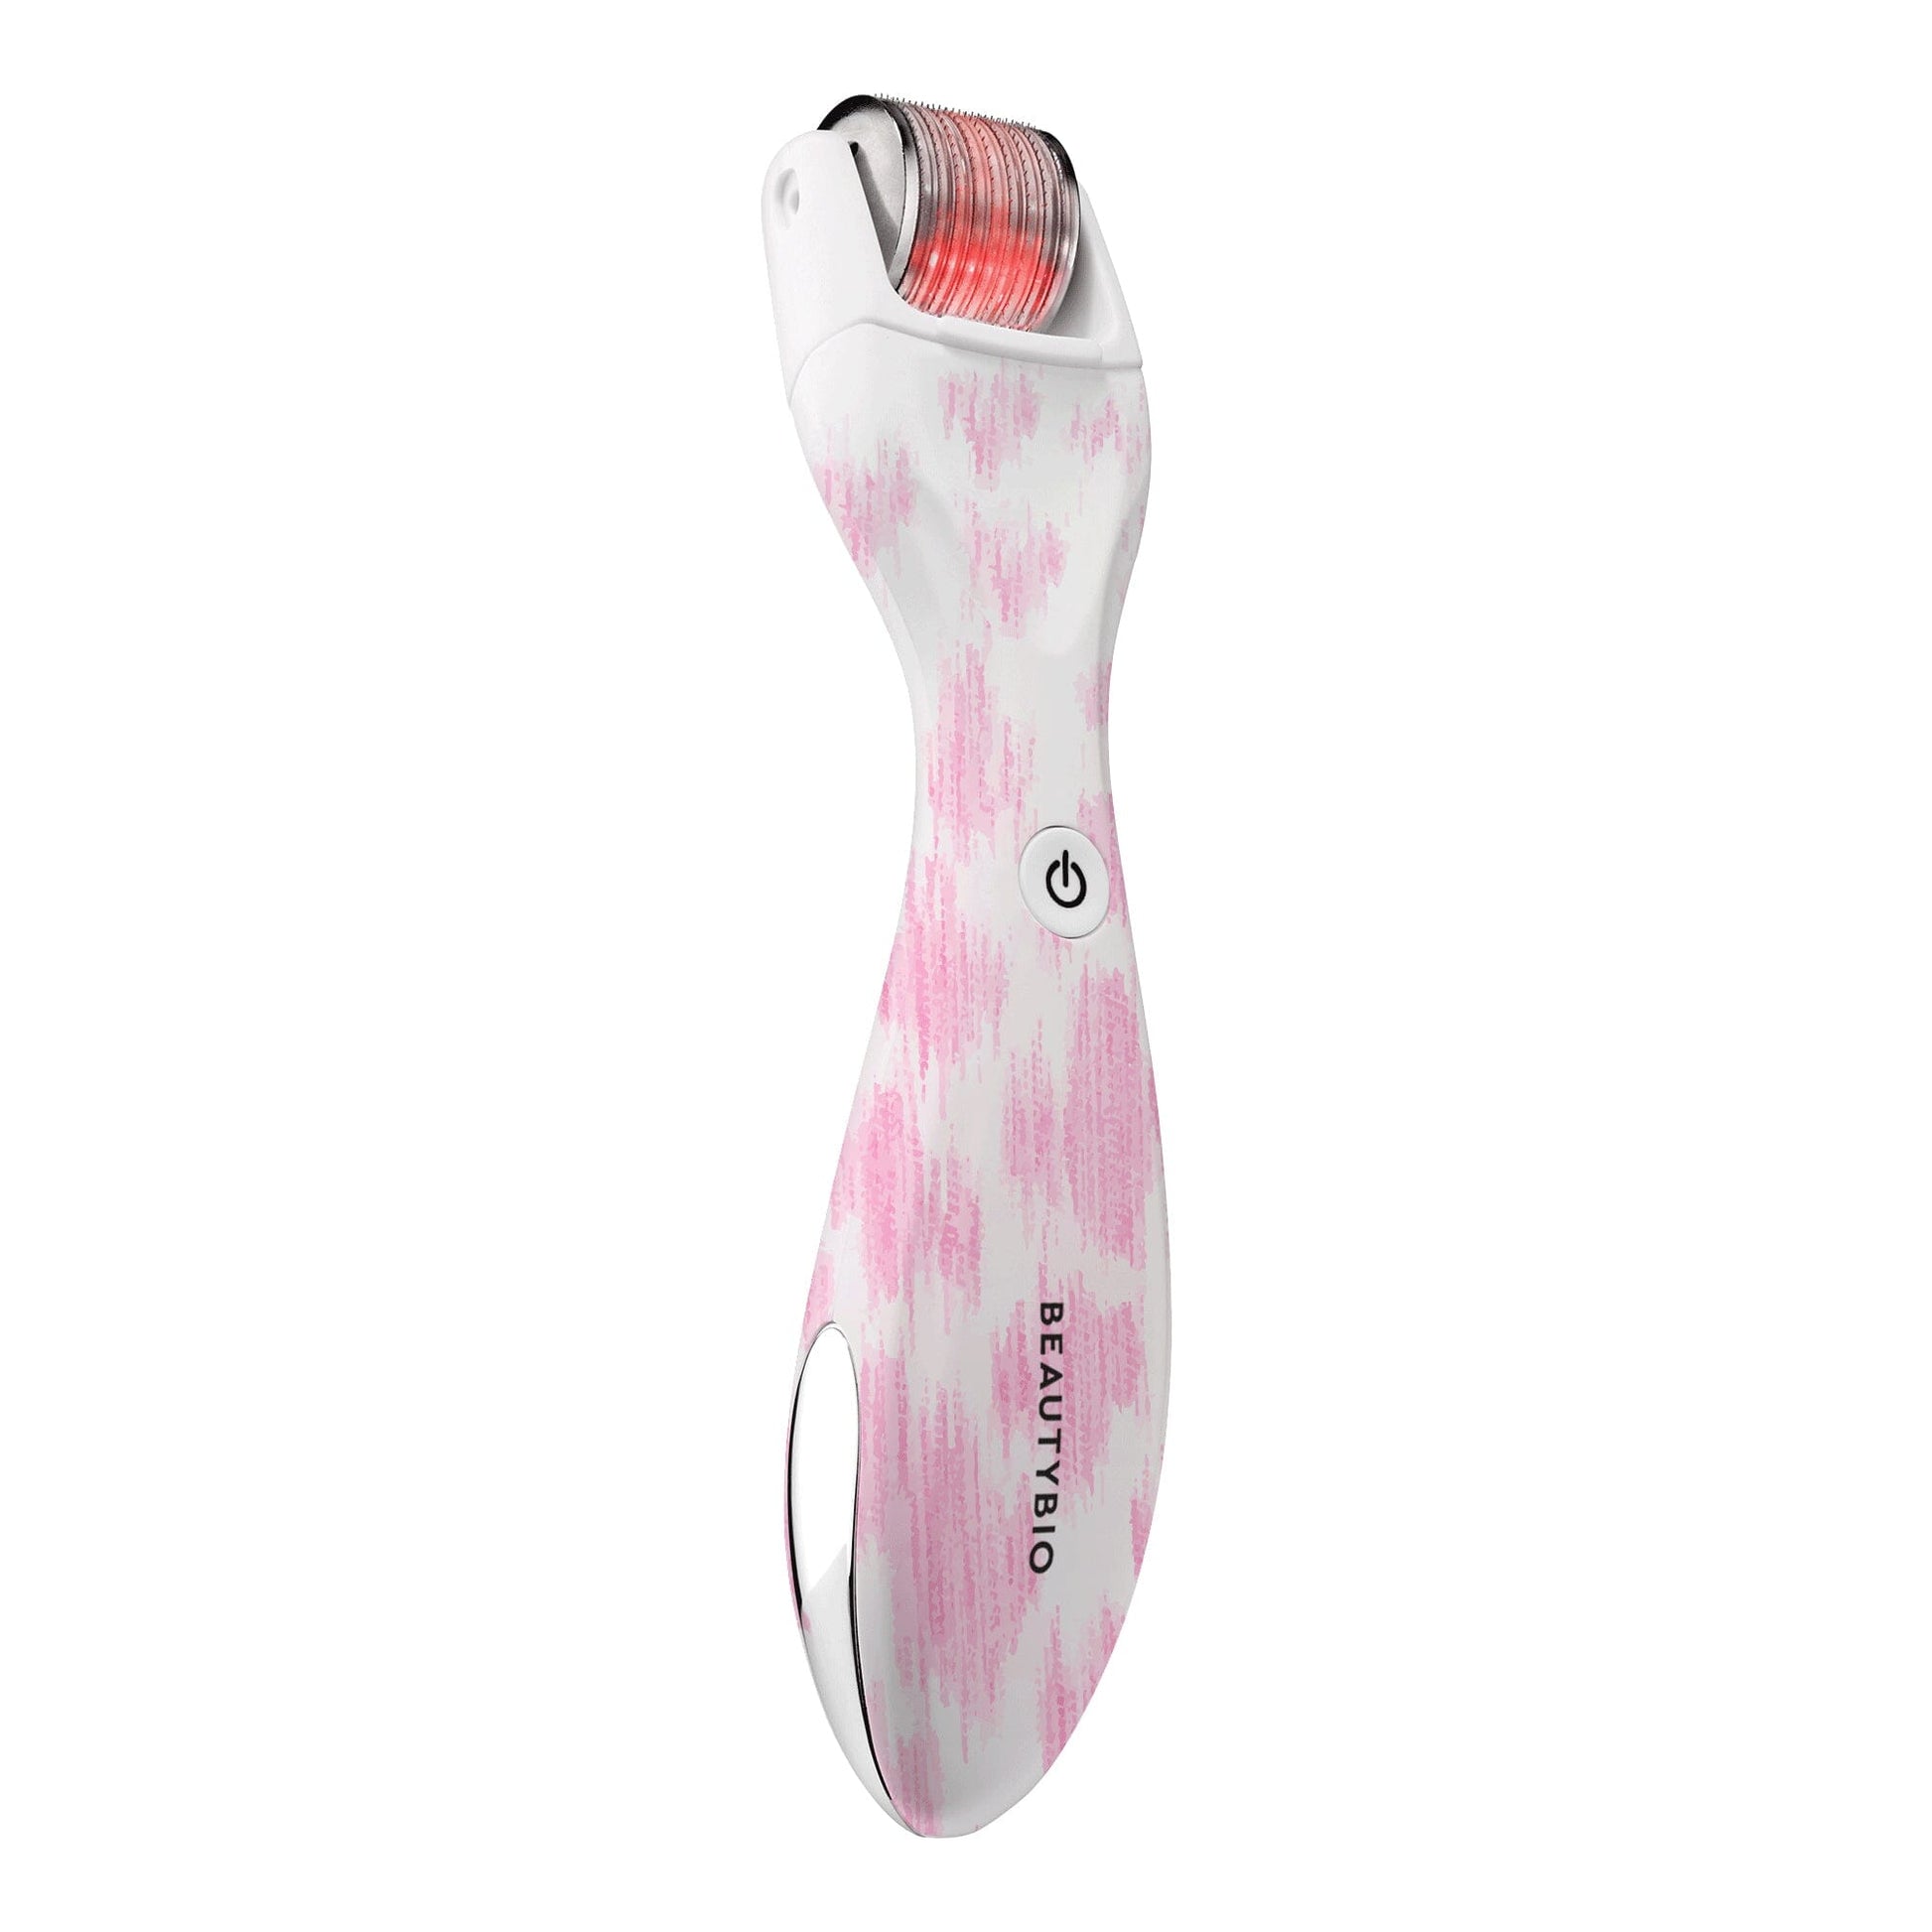 GloPRO® At-Home Microneedling Tool GloPRO BeautyBio Hot Pink Leopard 